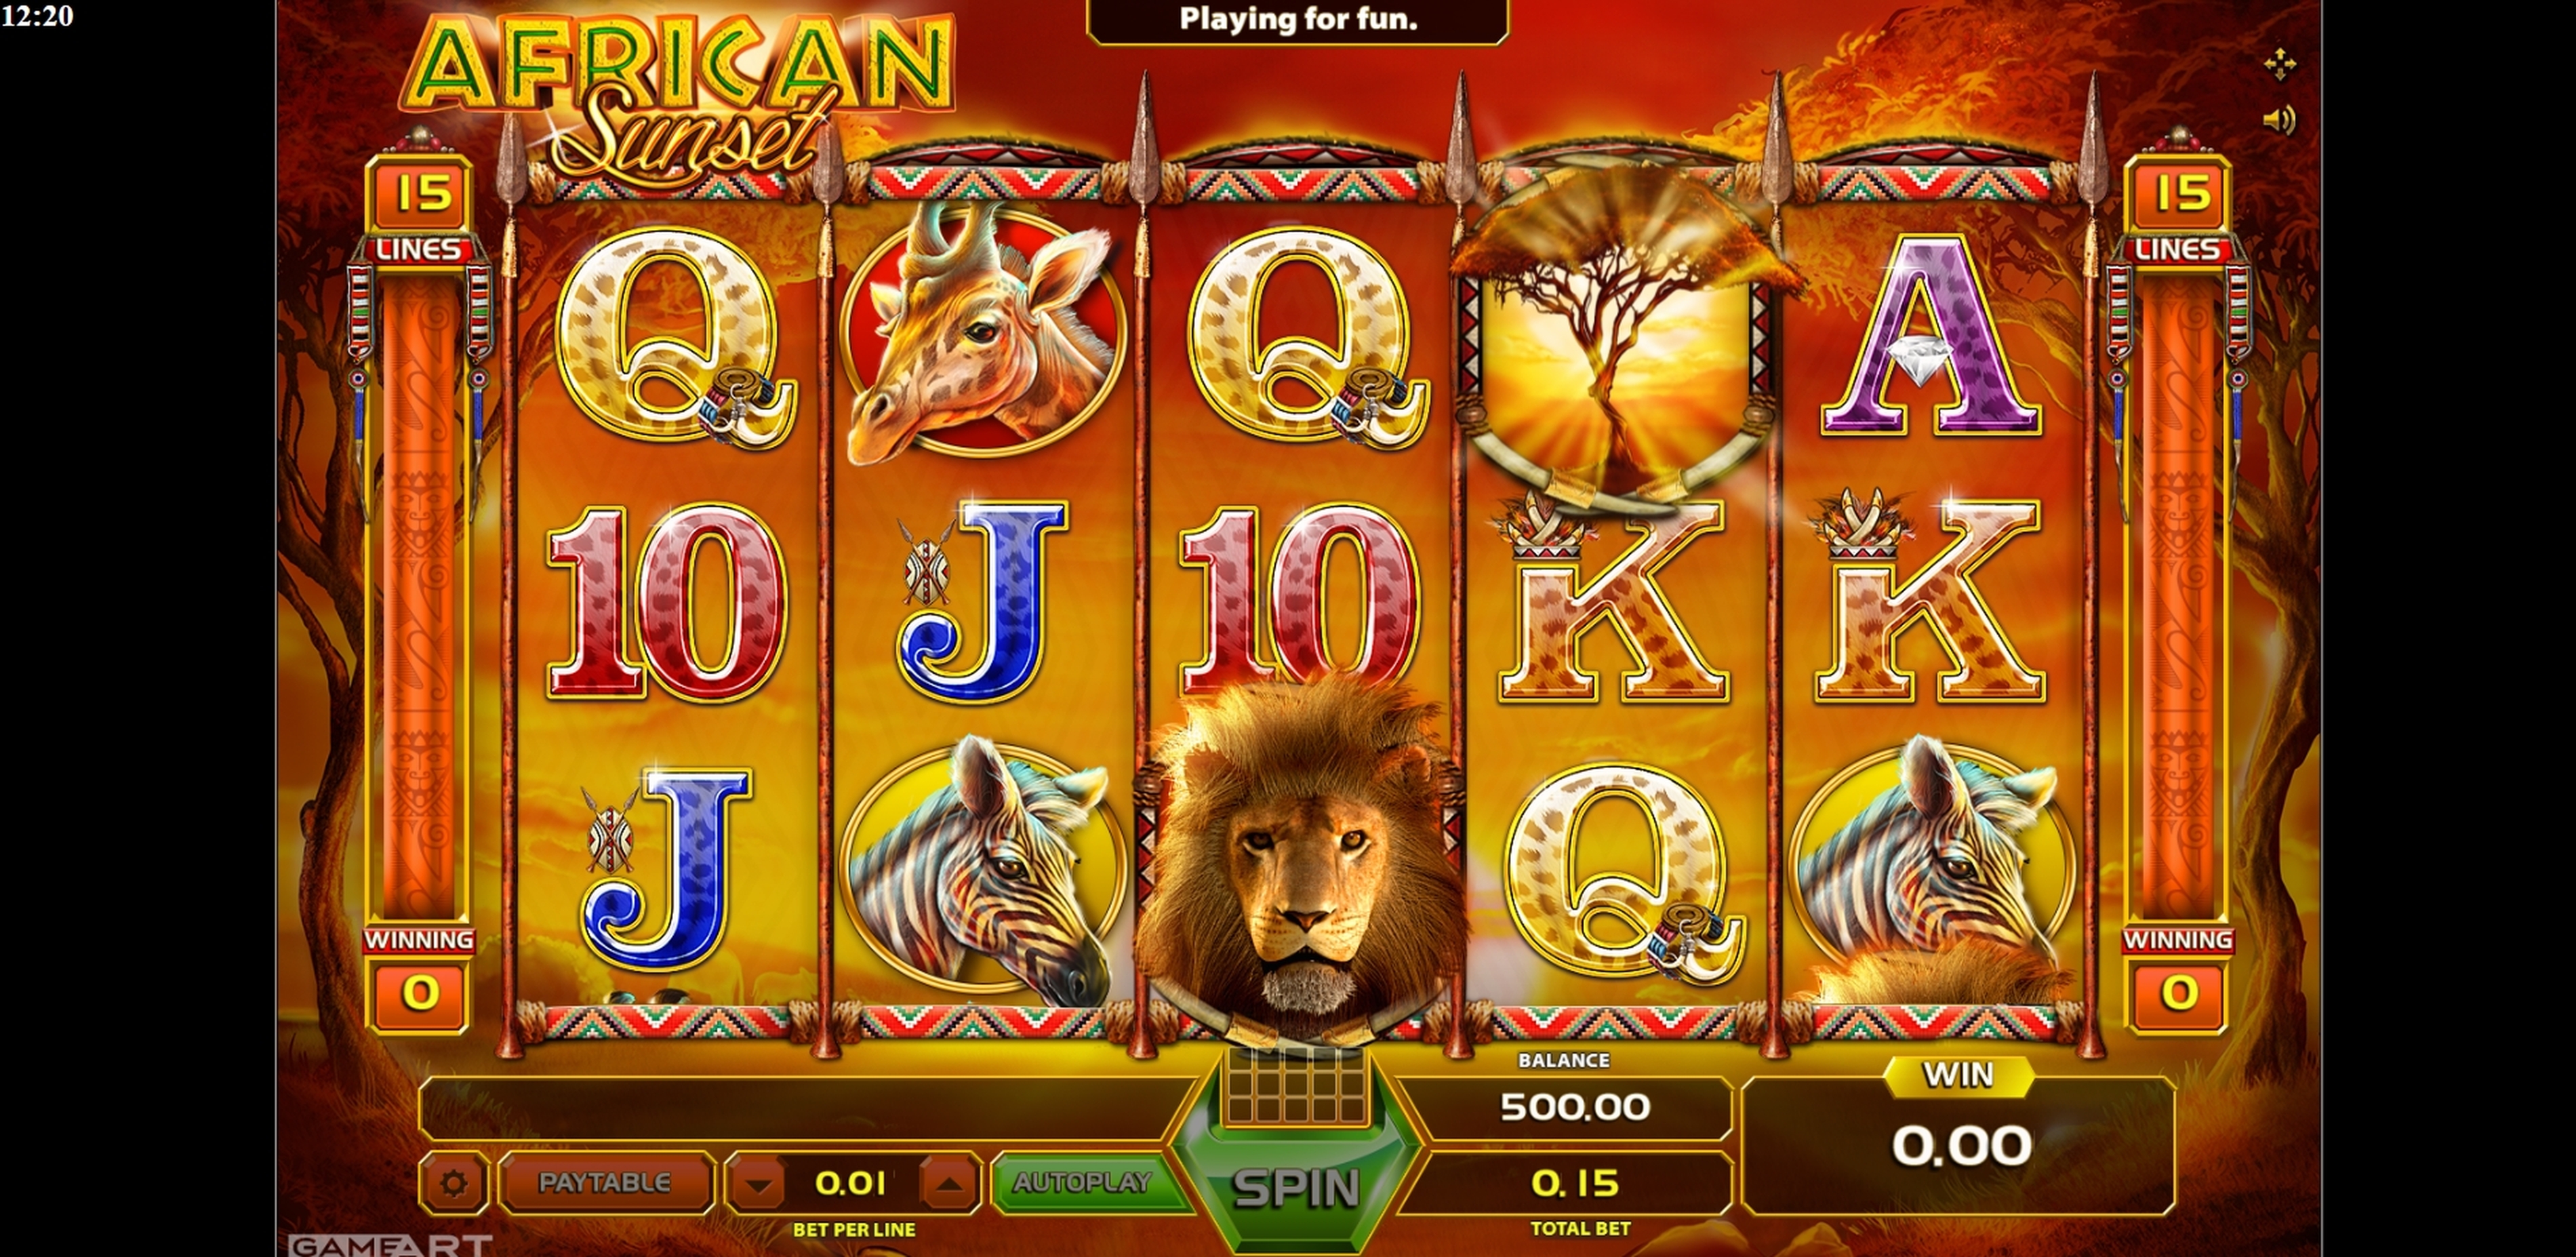 Reels in African Sunset Slot Game by GameArt